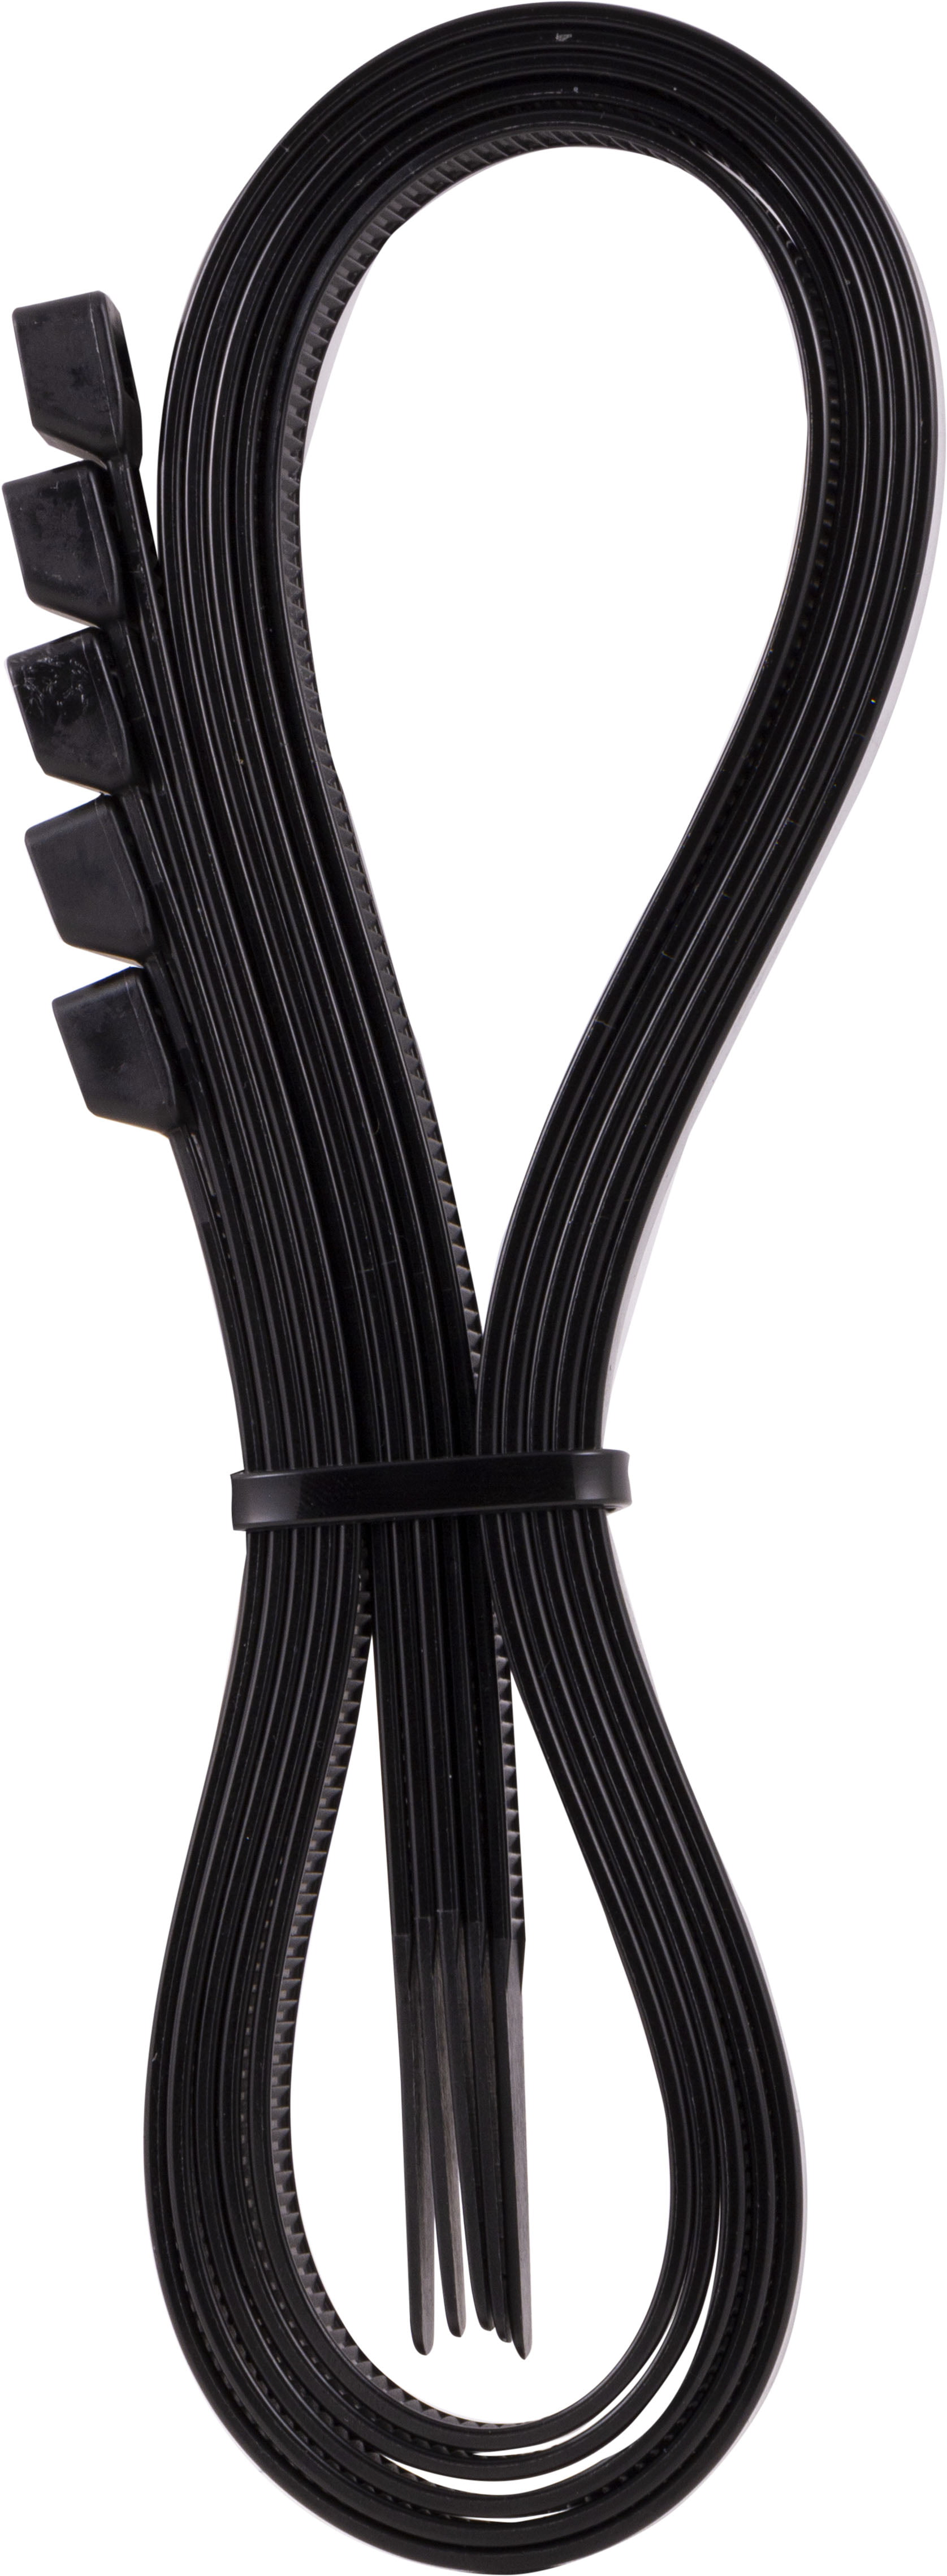 Cable Ties 24-inch Black 180 LBF UV Resistant Nylon 5 count 